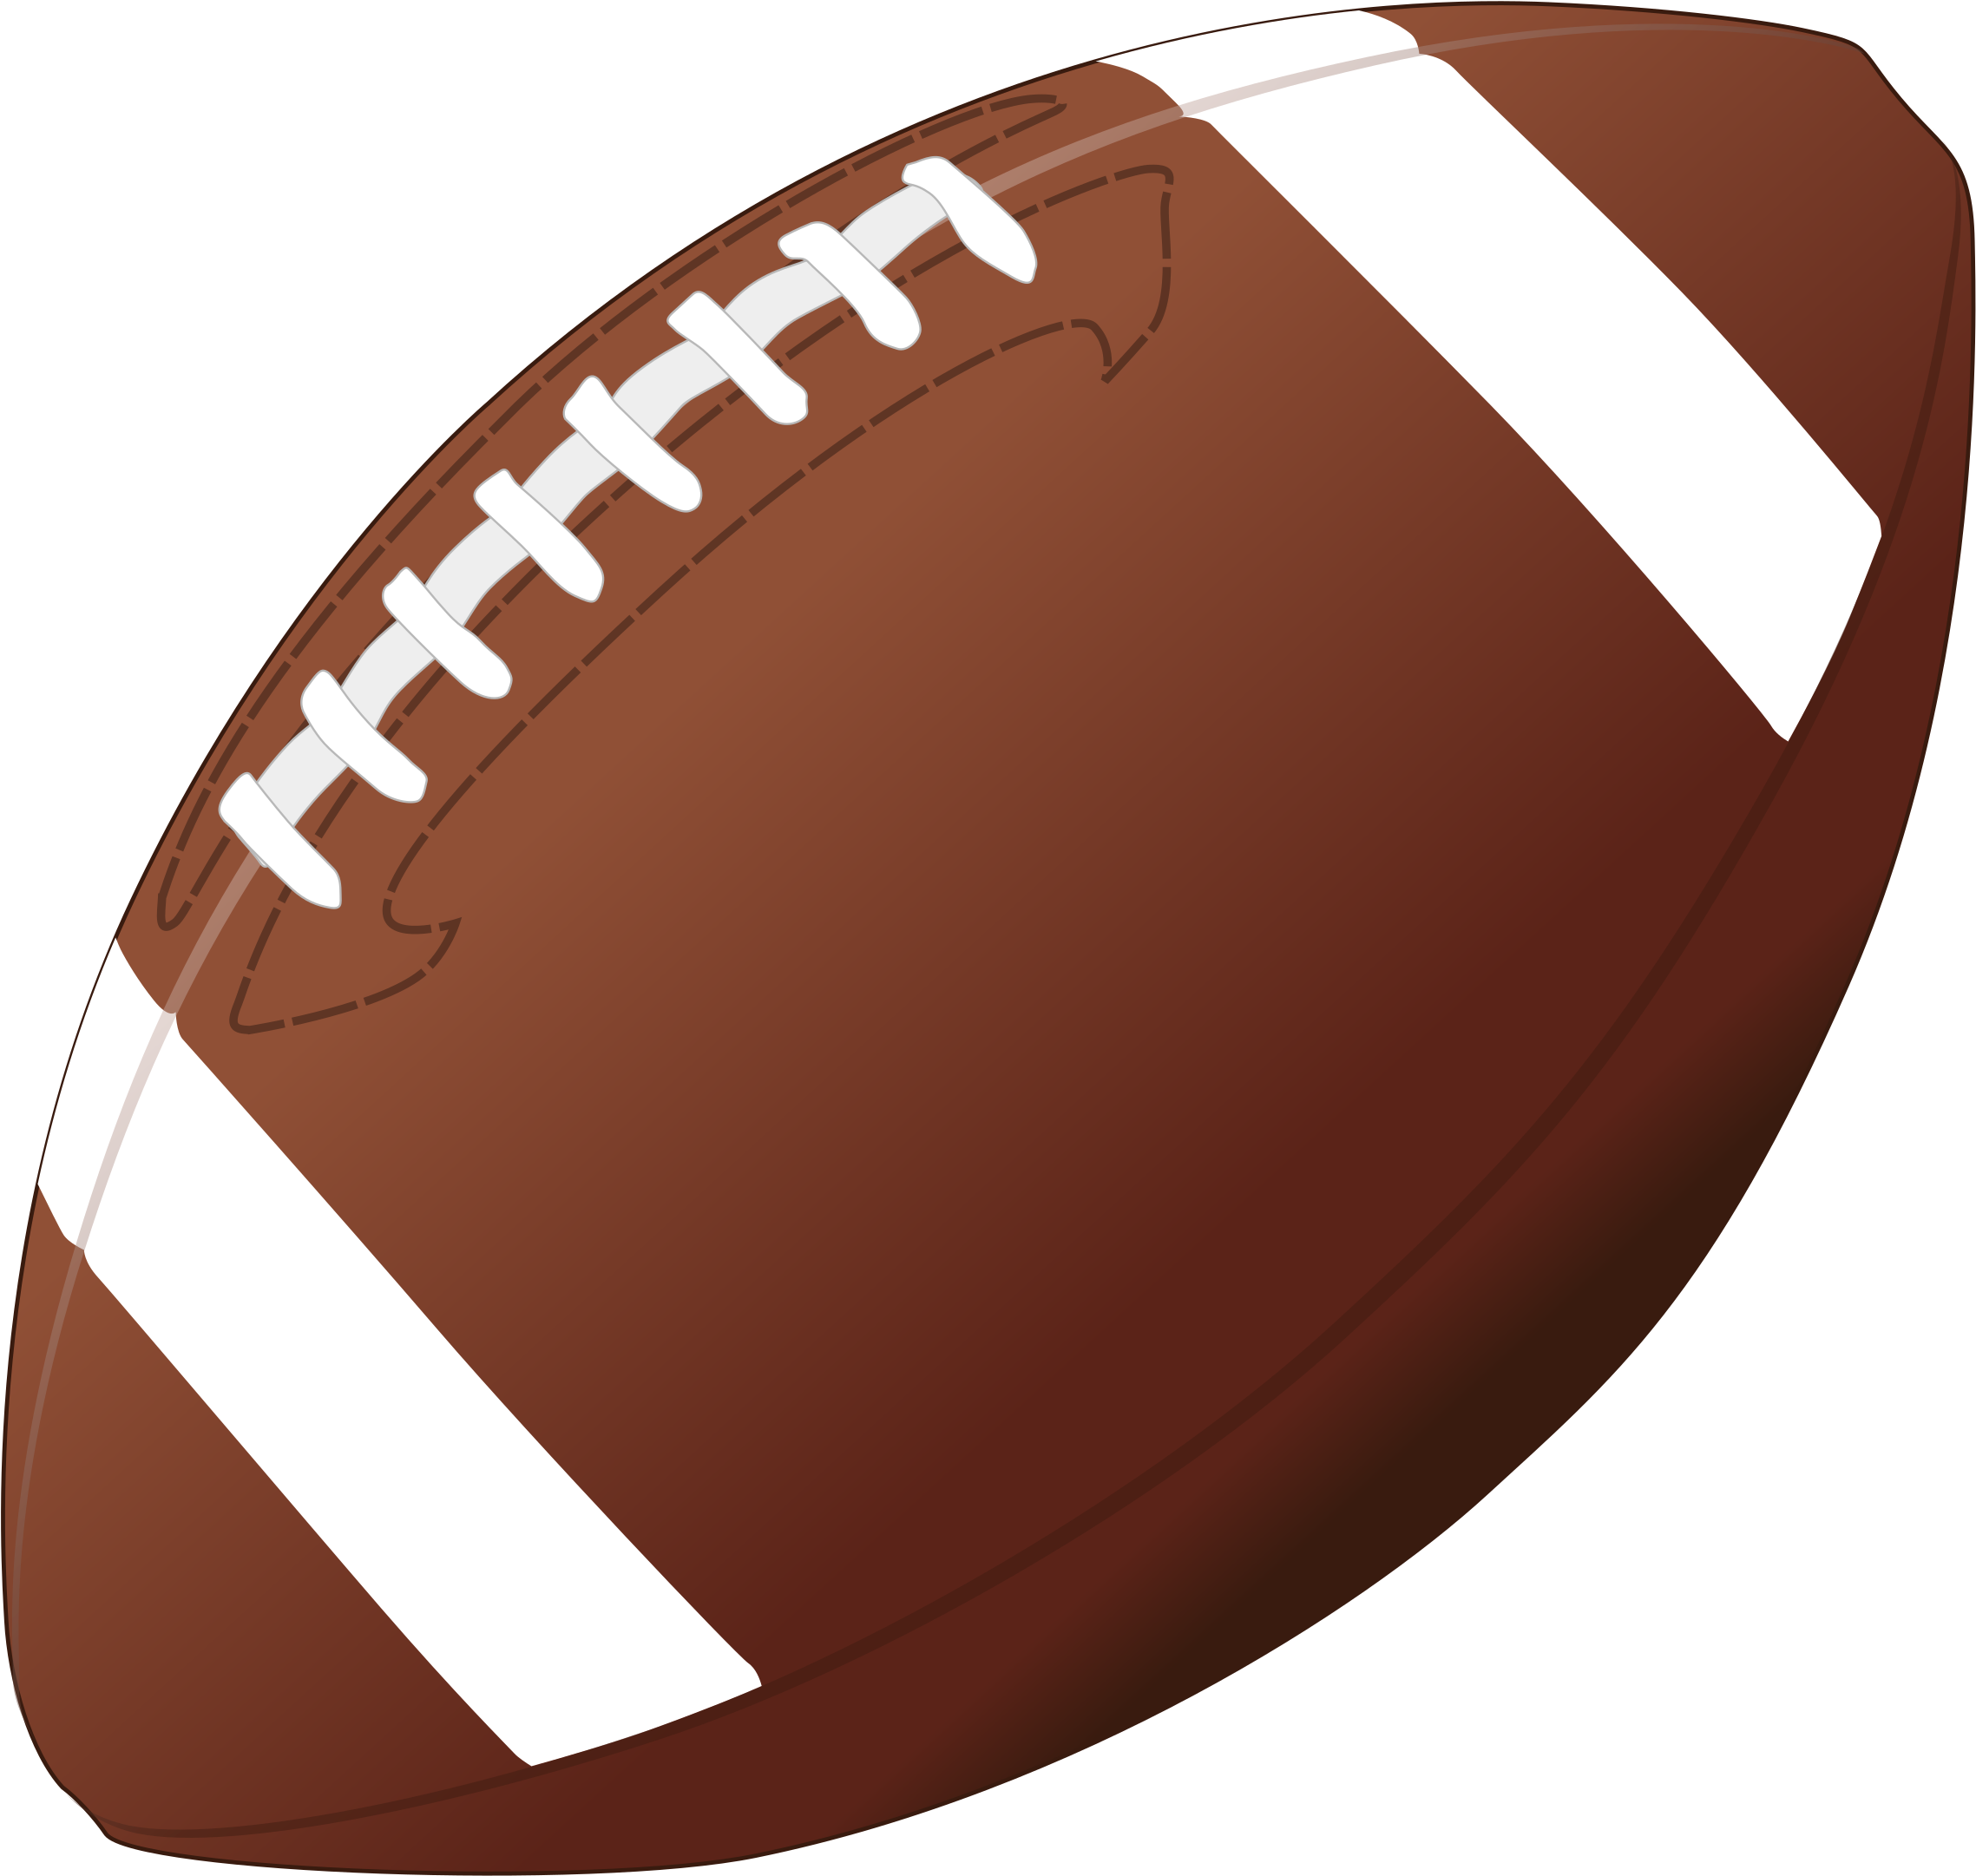 Illustration Of A Football - Football Clipart Png (2400x2400)